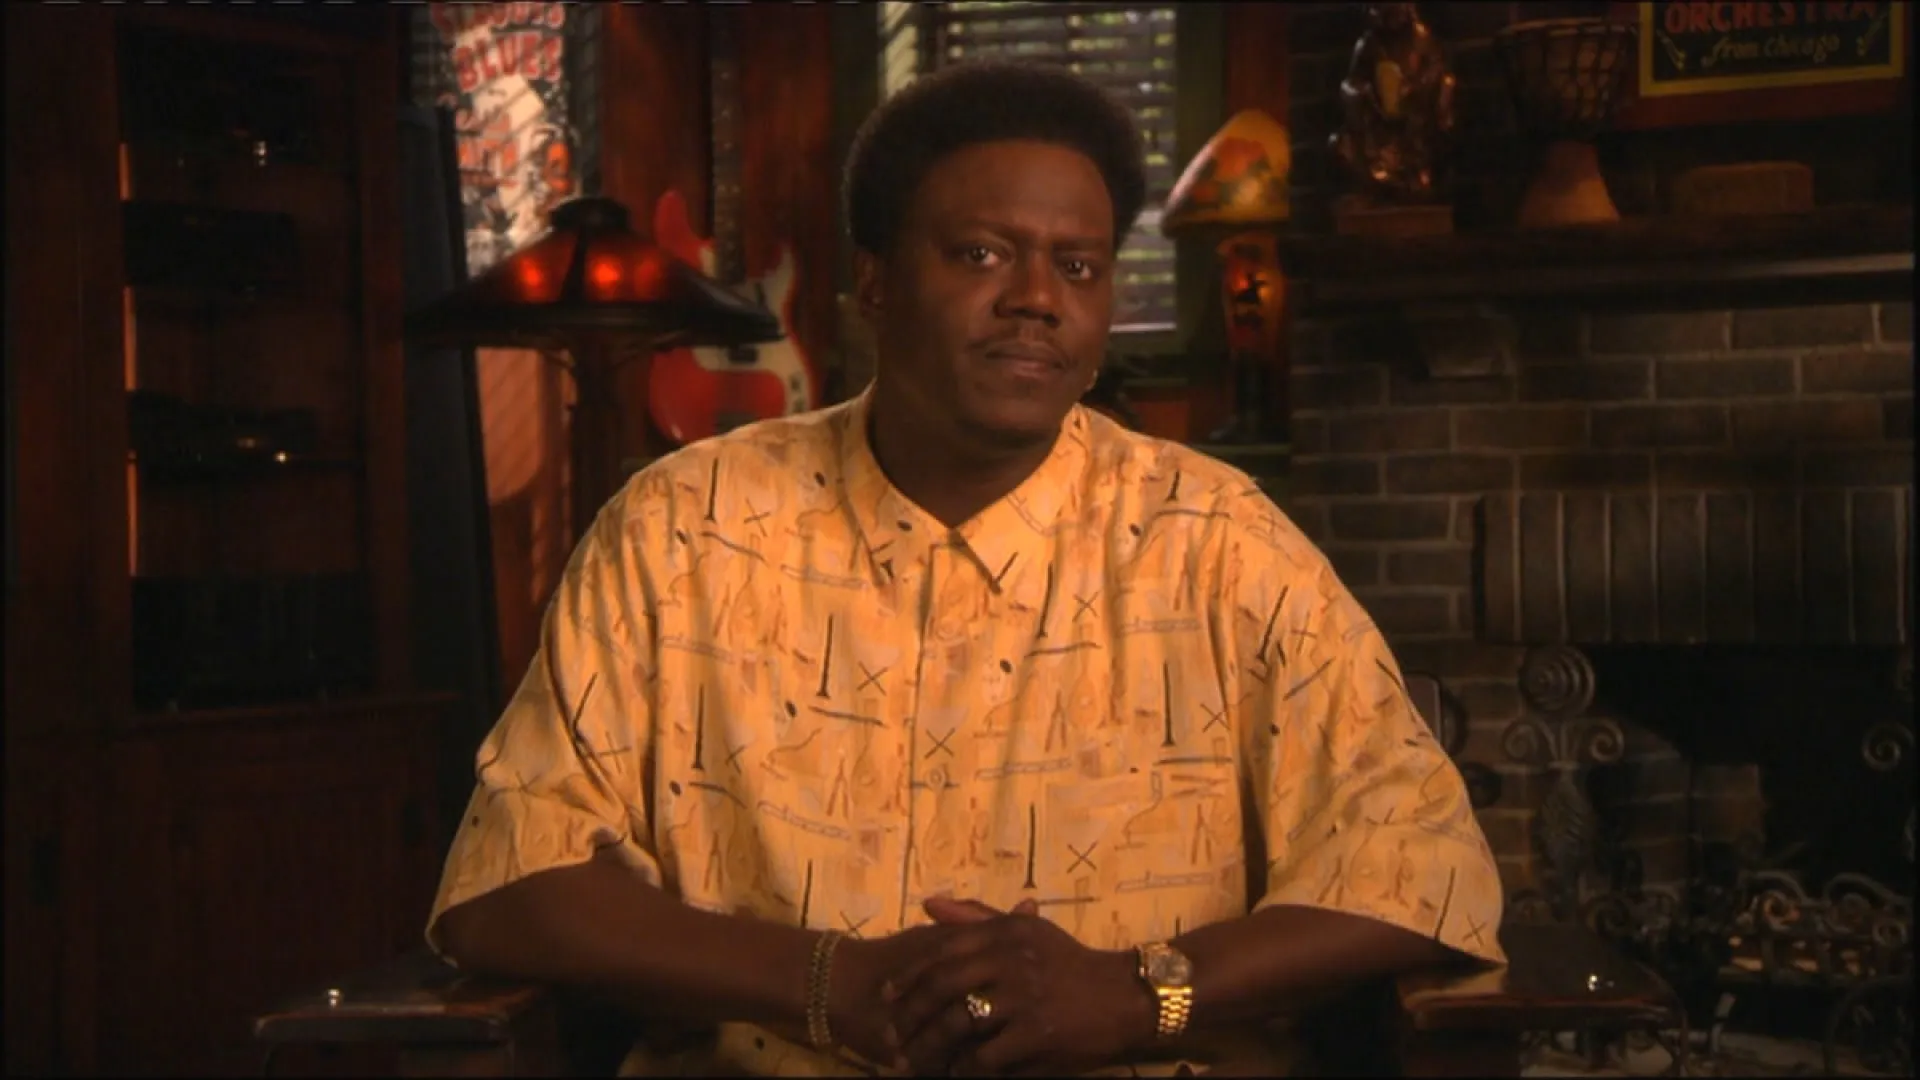 Bernie Mac playing an exaggerated version of himself.